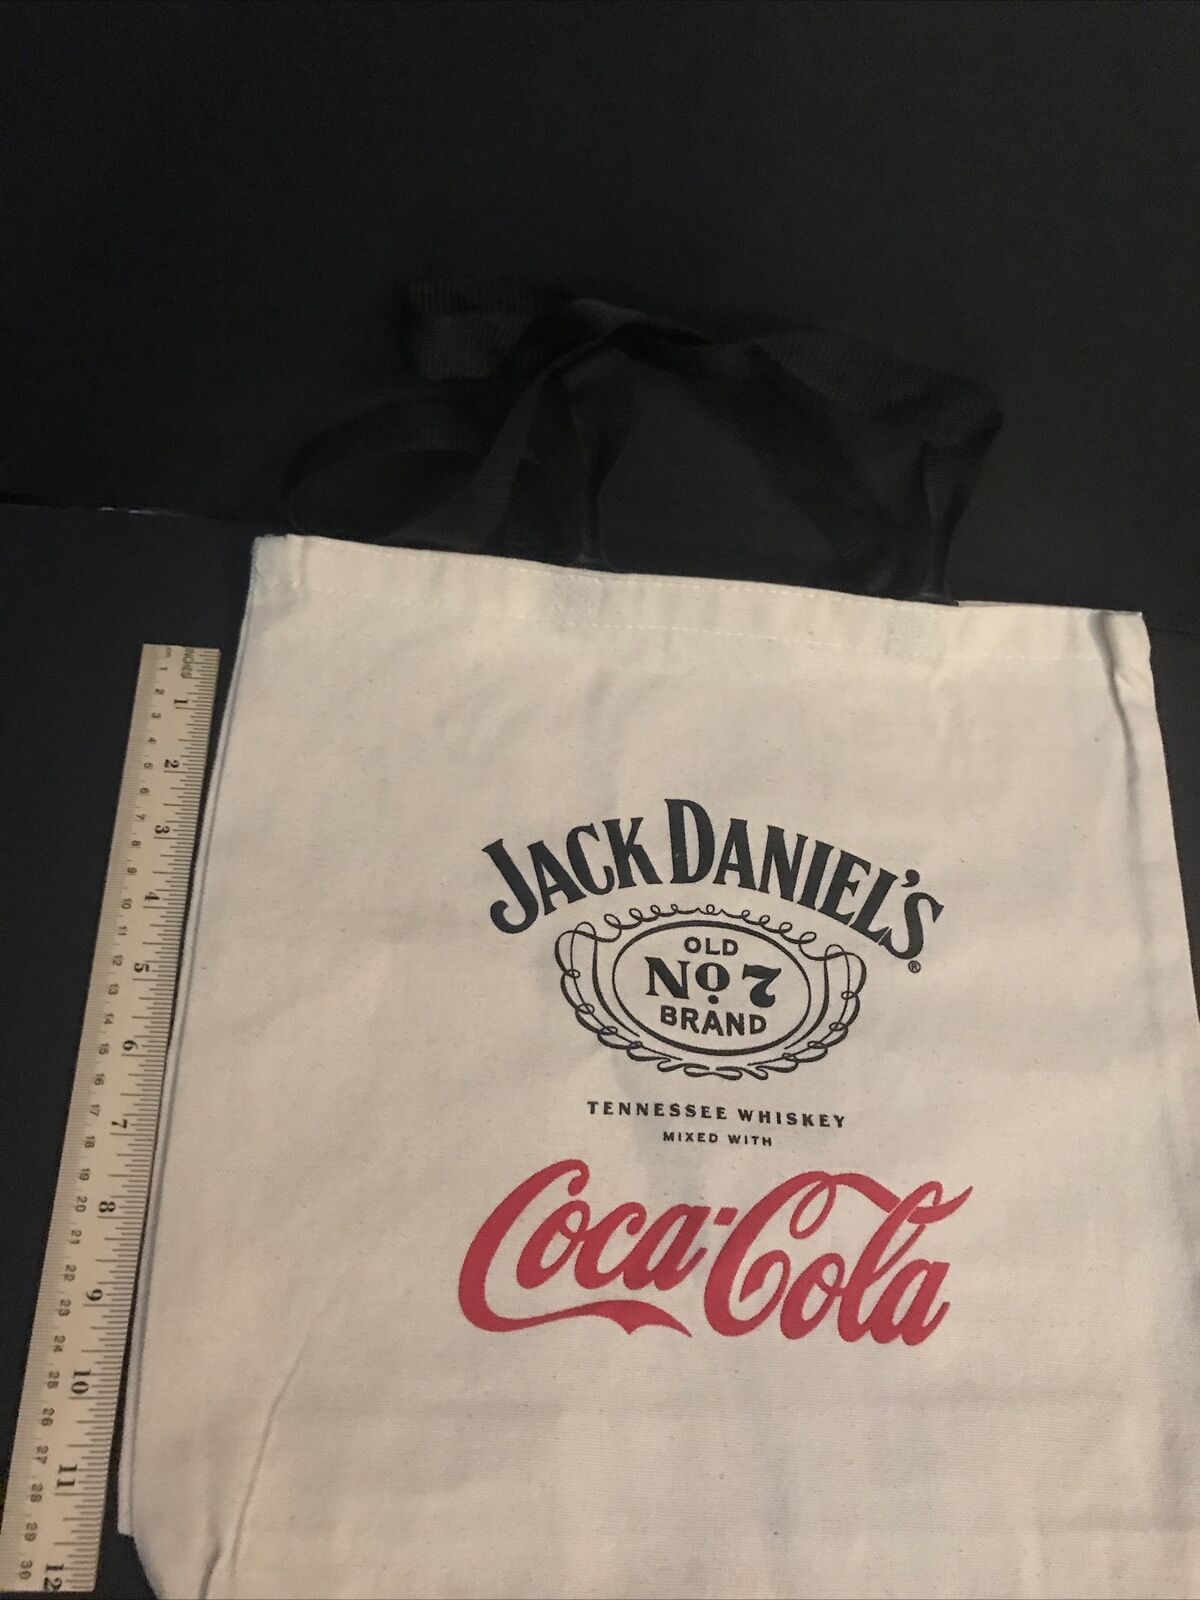 ✨Jack Daniel’s Old No 7 Brand Tennessee Whiskey Mixed With Coca-Cola Carry Bag✨